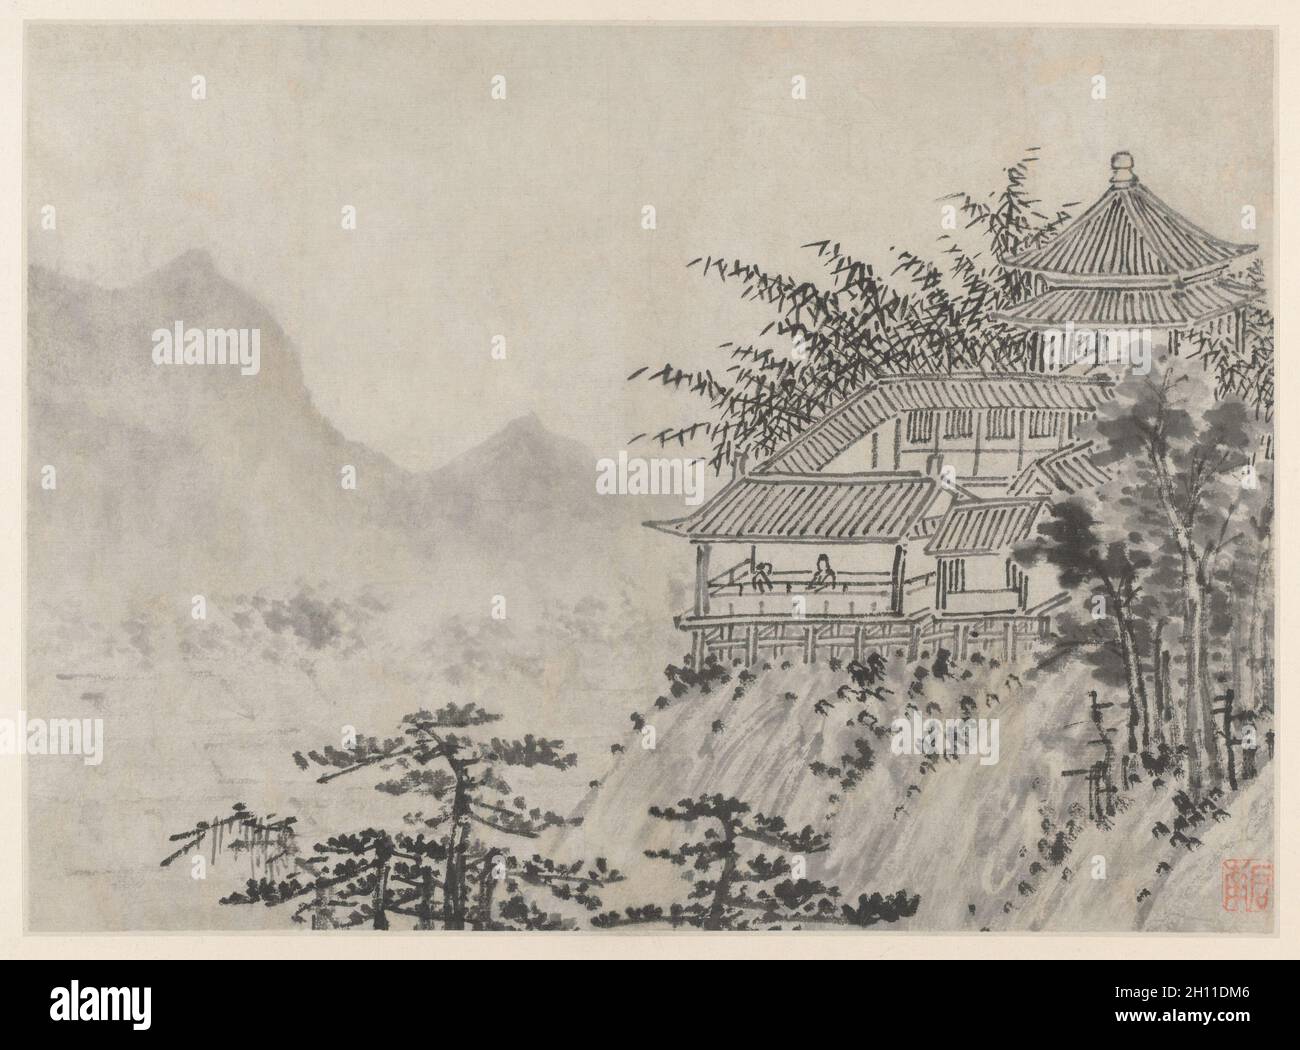 Twelve Views of Tiger Hill, Suzhou: The Thousand Acres of Clouds, after 1490. Shen Zhou (Chinese, 1427-1509). Album leaf, ink on paper or ink and slight color on paper; image: 30.8 x 42.2 cm (12 1/8 x 16 5/8 in.); overall: 36.5 x 49.9 cm (14 3/8 x 19 5/8 in.). Stock Photo